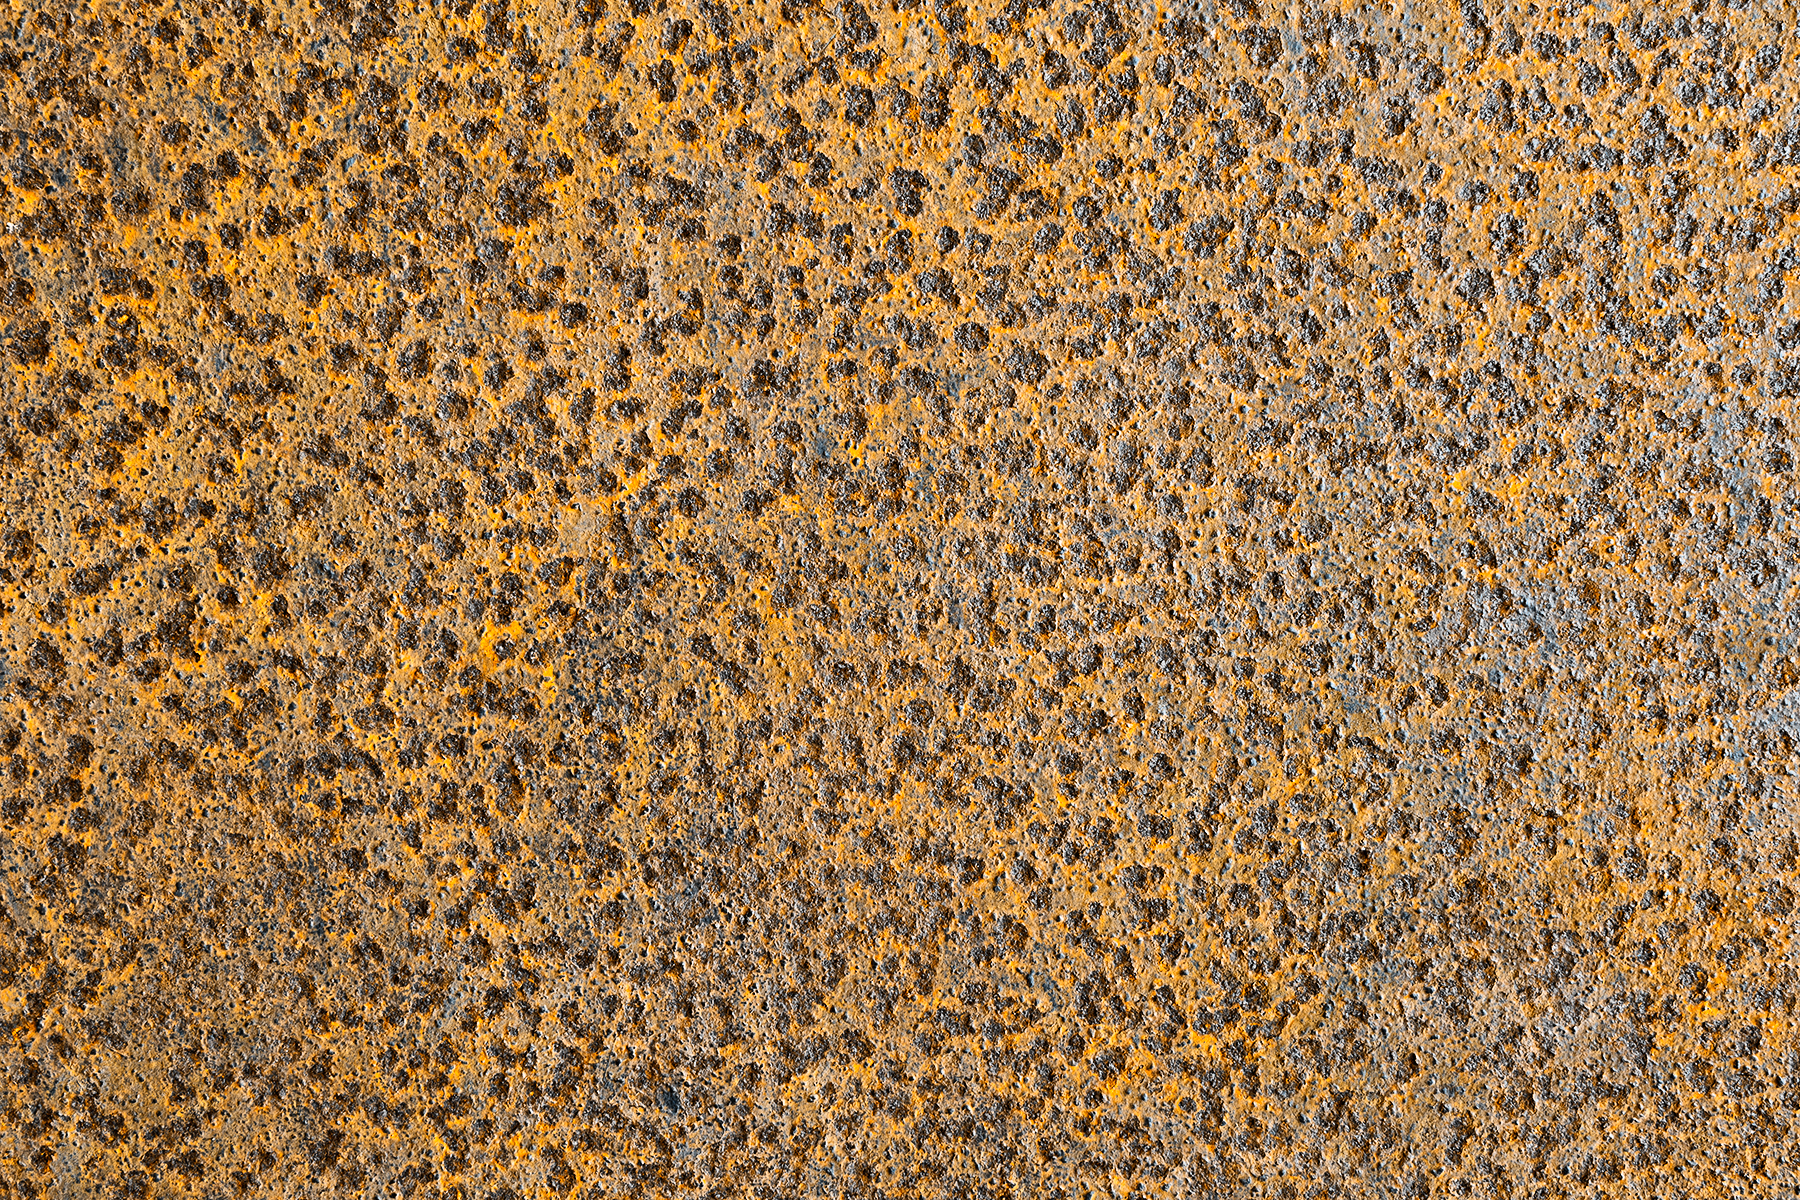 Rusty Grunge Texture - HDR, Abstract, Picture, Rough, Resource, HQ Photo